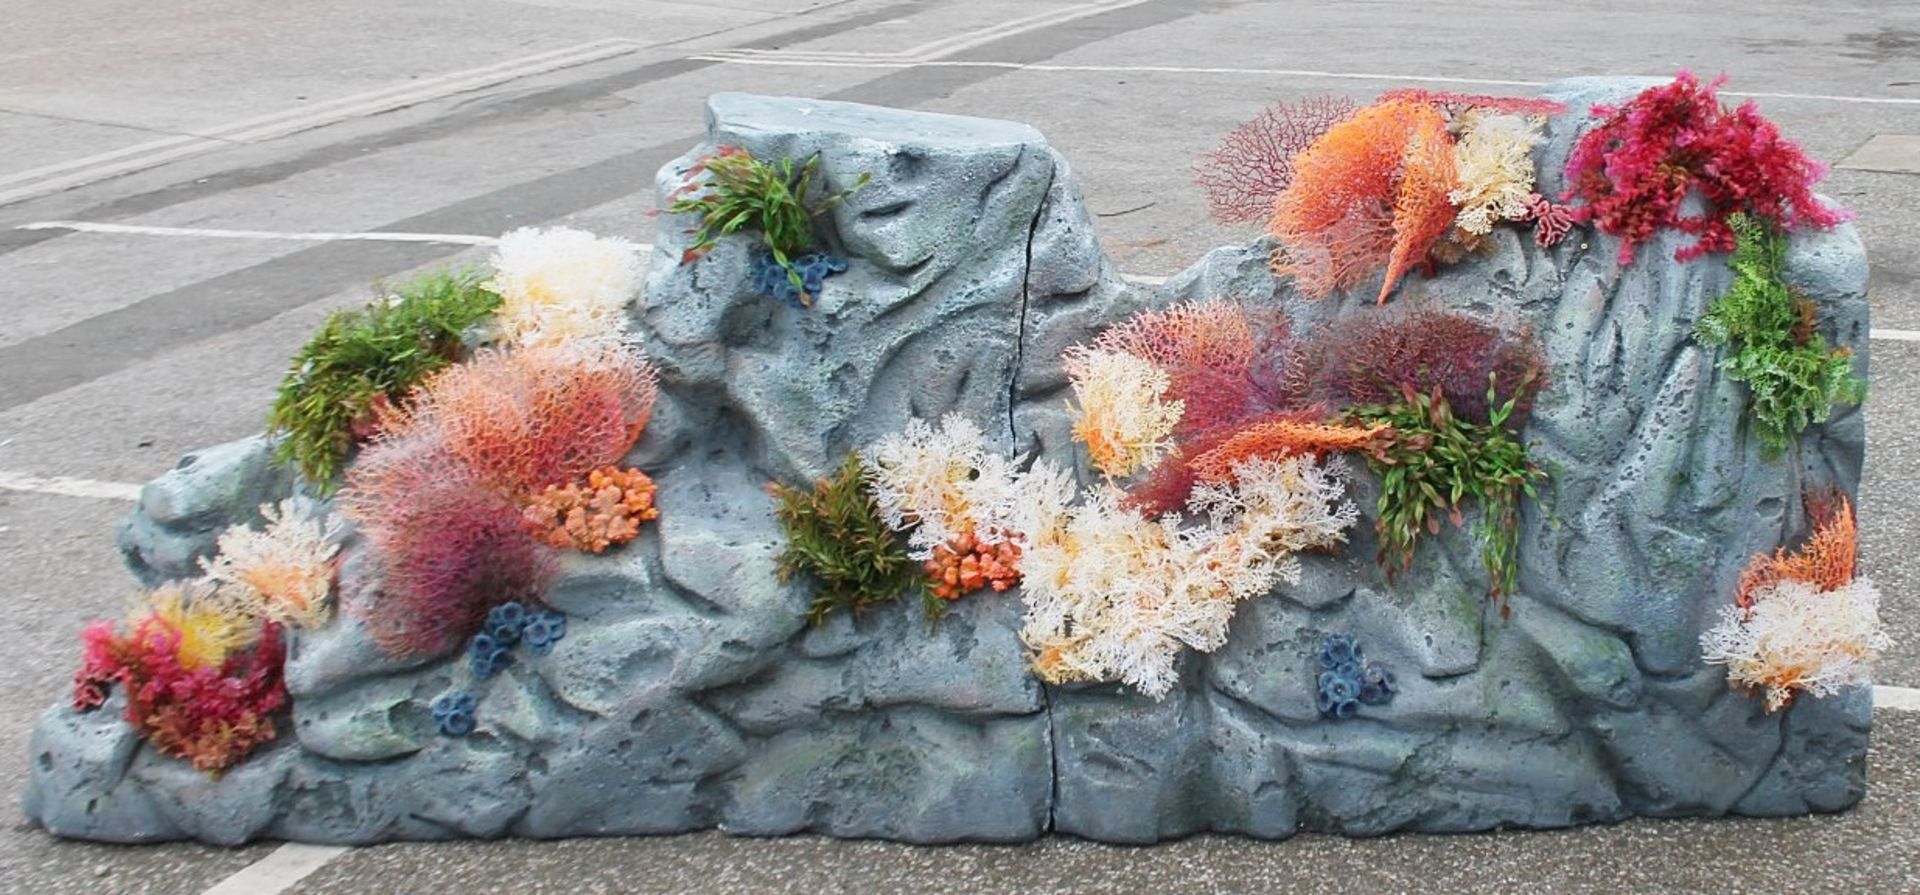 1 x Bespoke Coral Reef Shop Display / Theatre Stage Prop - 2.8 Metres Long - Recently Removed From A